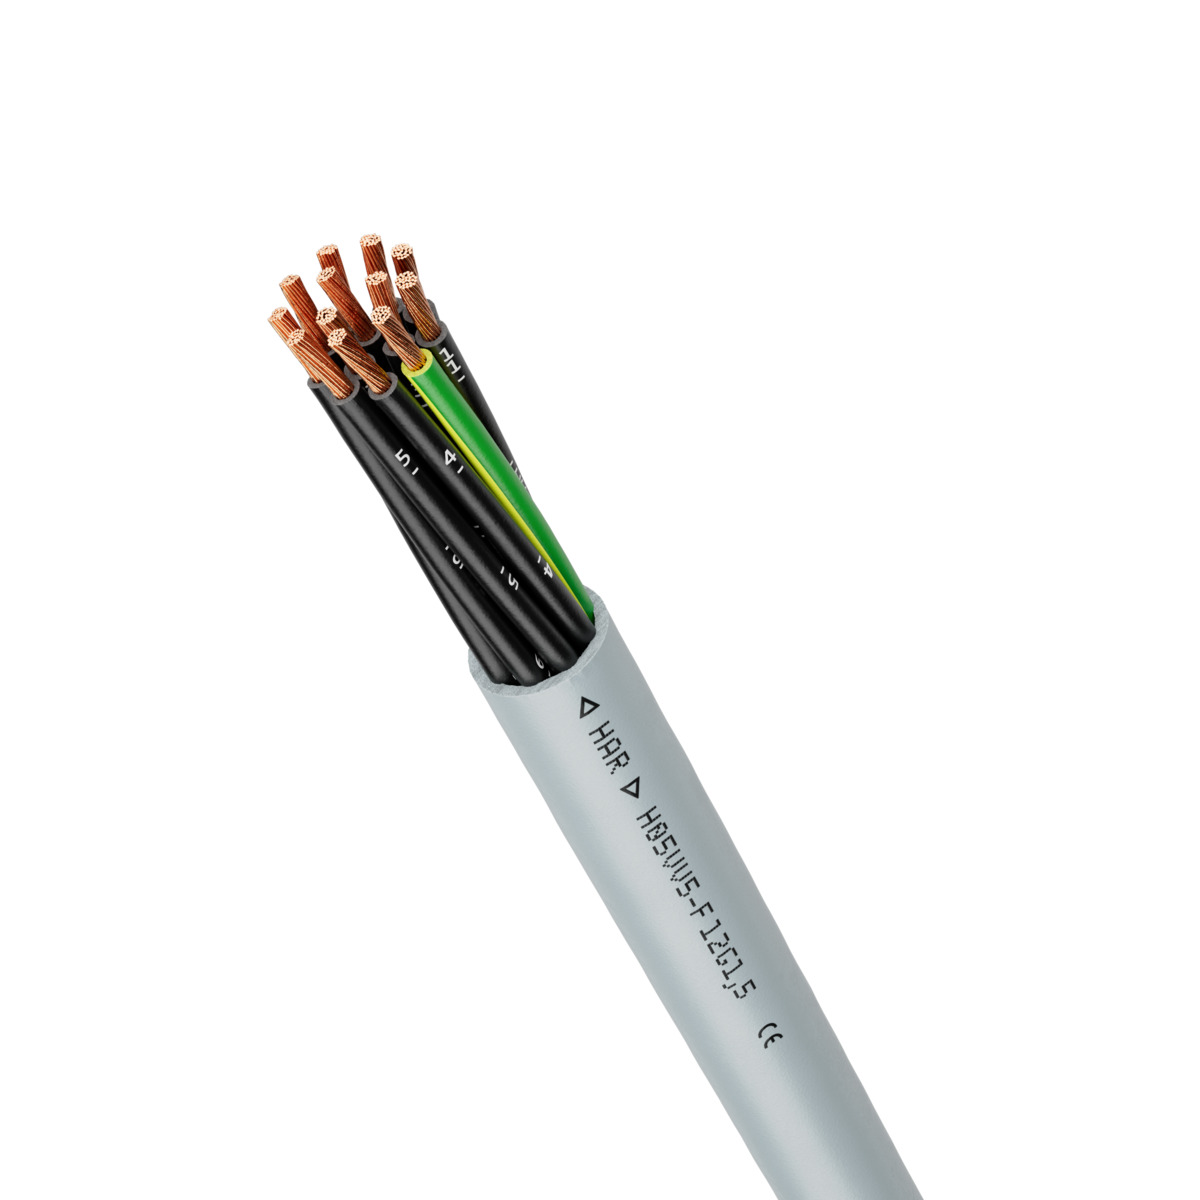 H05VV5-F control cable